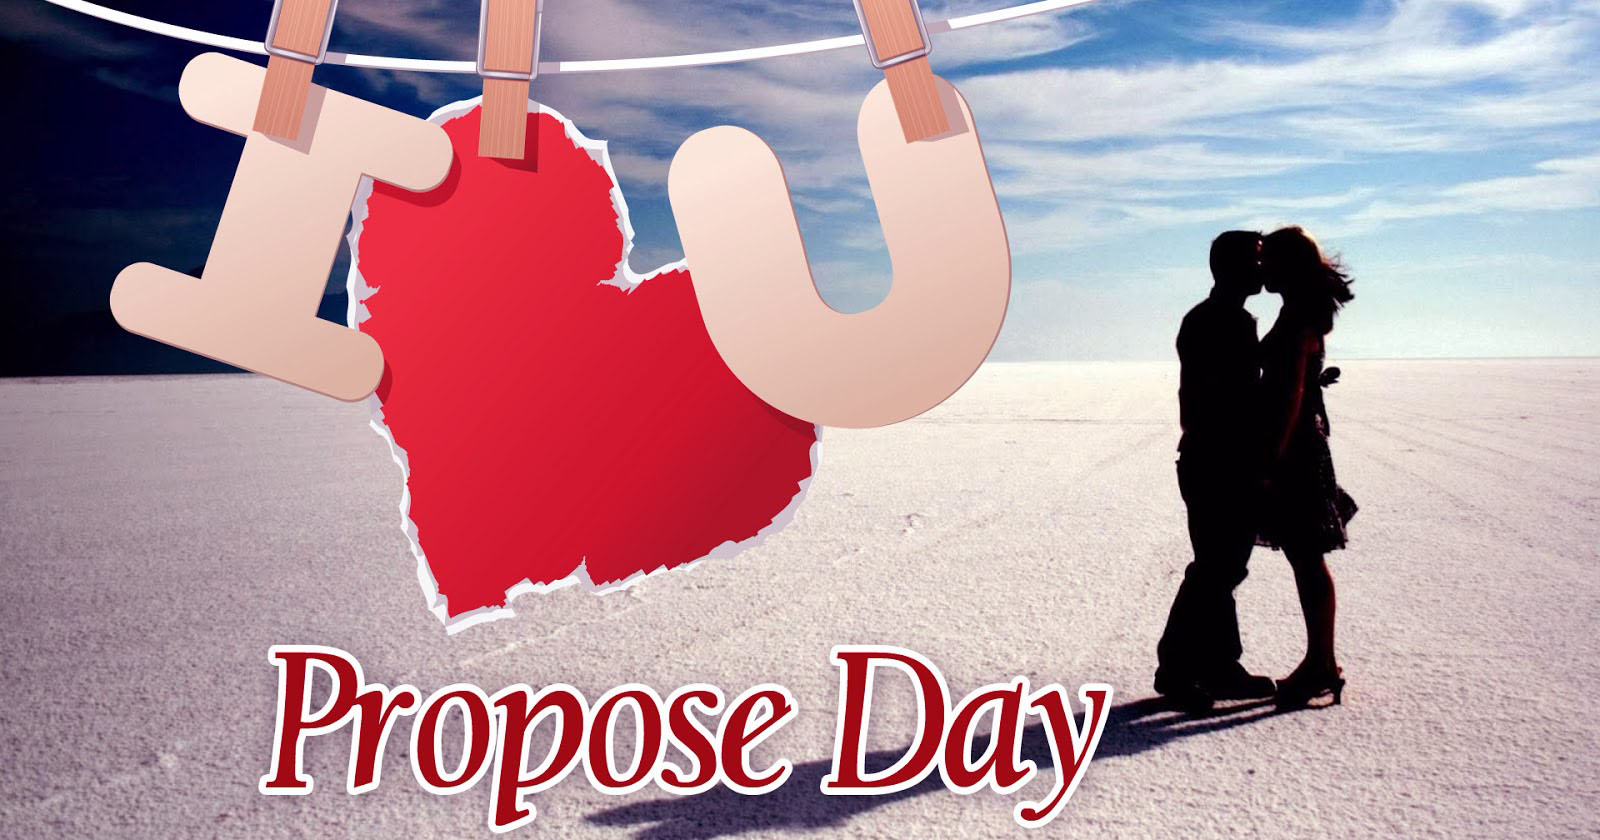 Happy Propose Day HD Wallpaper Image